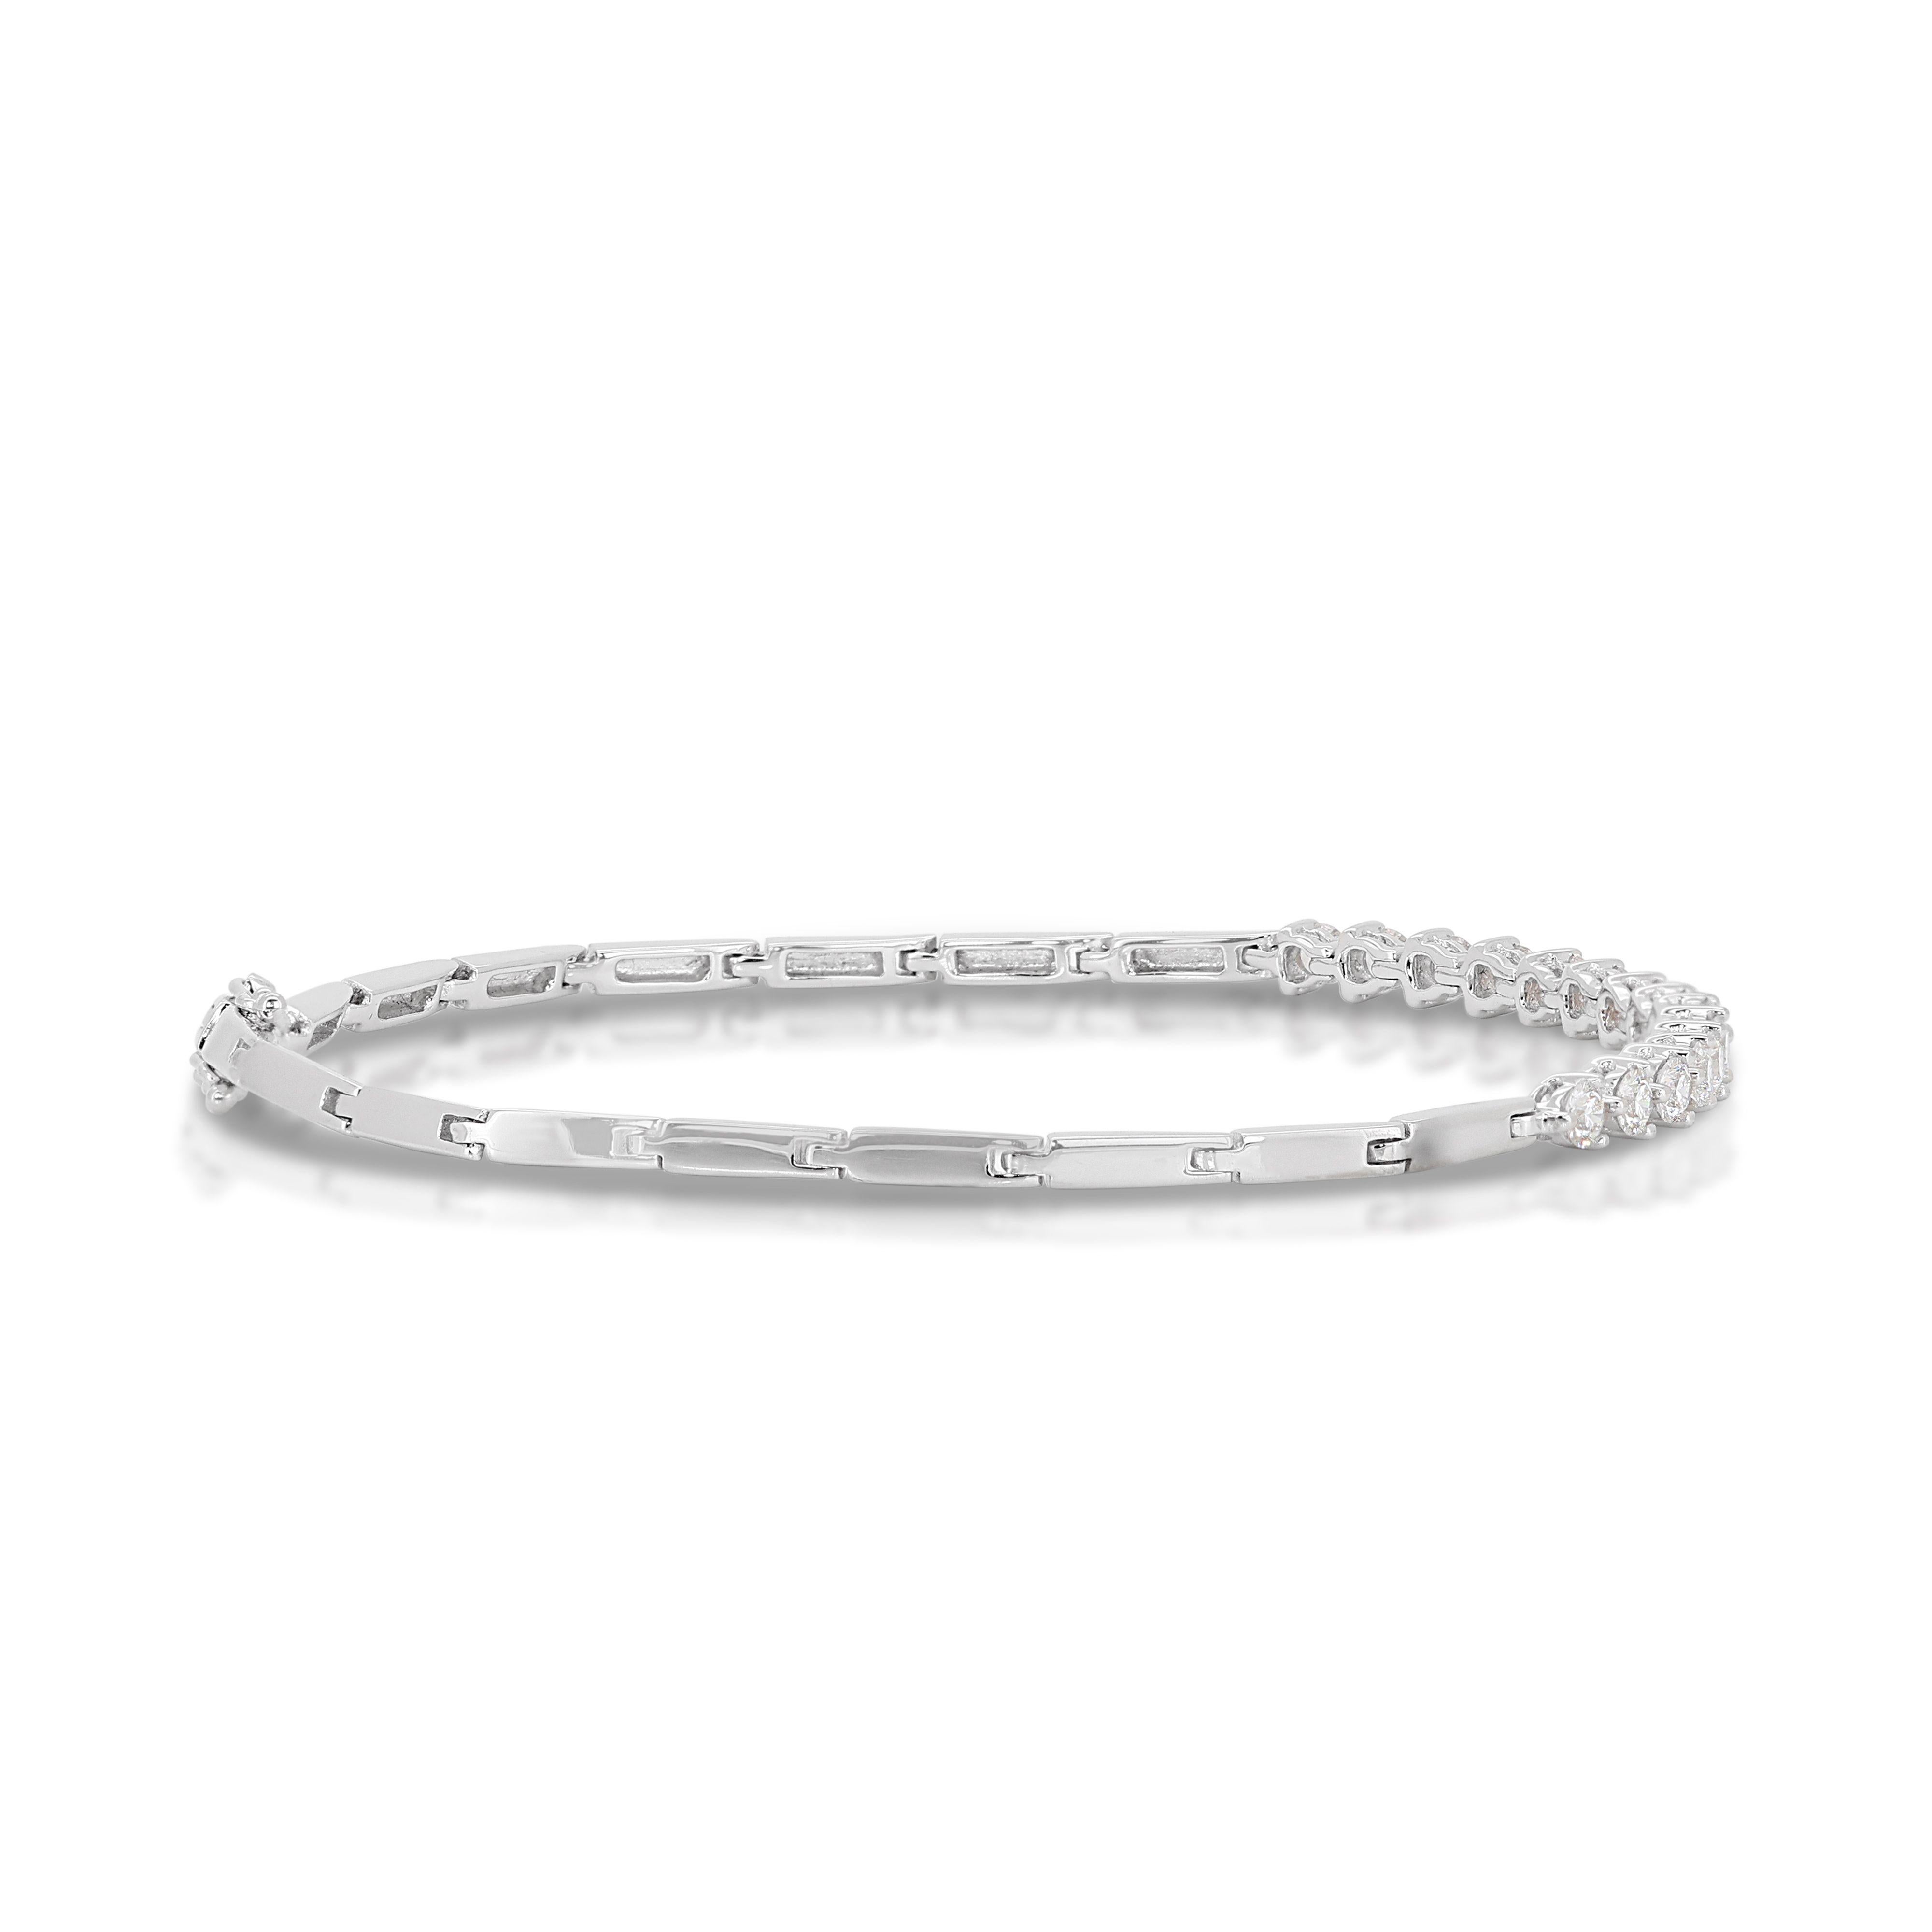 Exquisite 0.75ct Eternity Diamond Bracelet set in 18K White Gold In New Condition For Sale In רמת גן, IL